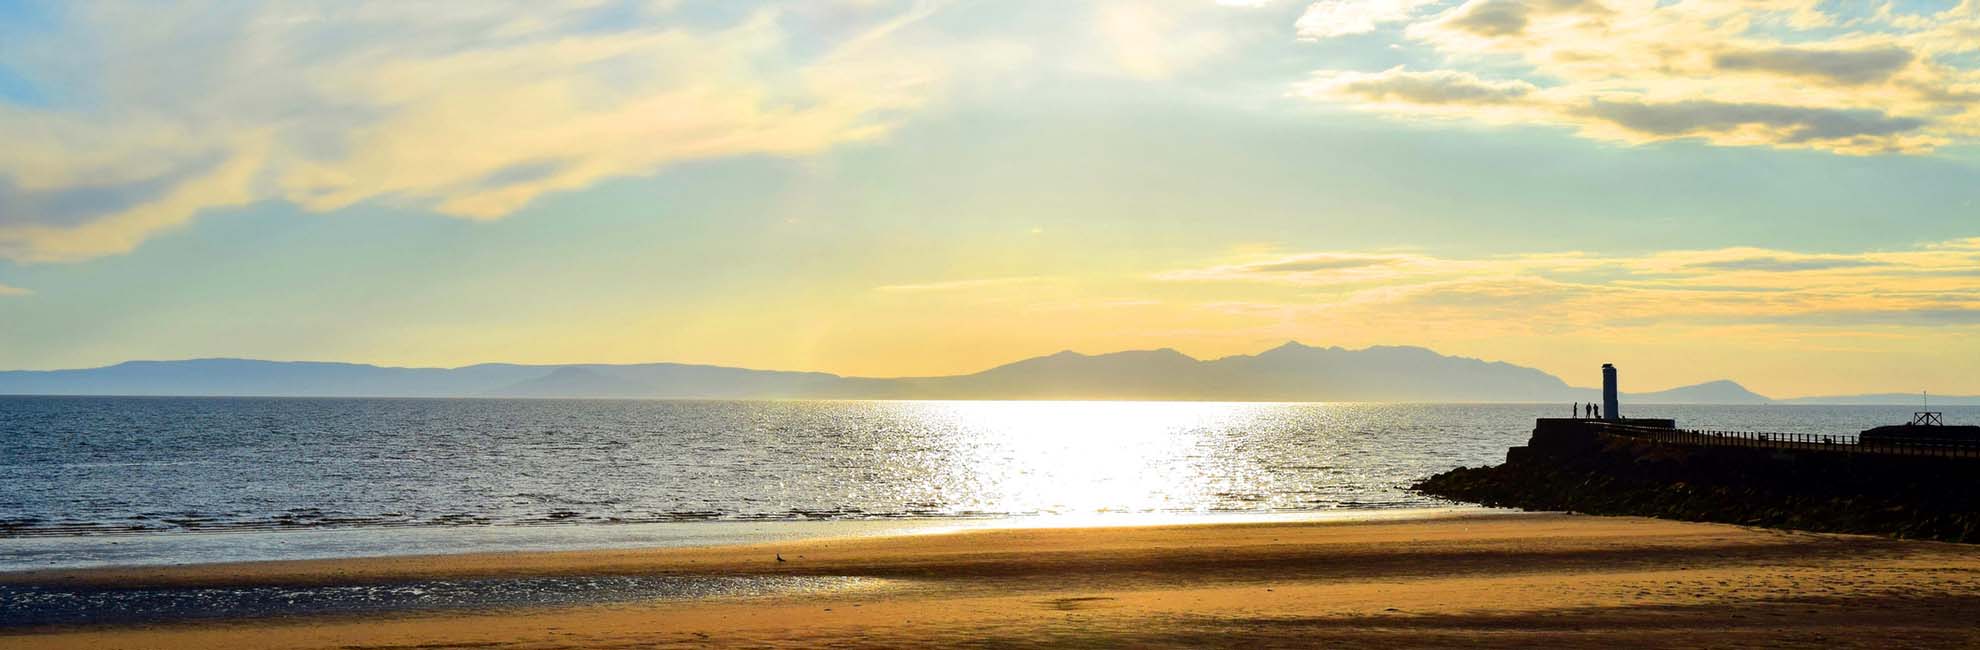 Sunset over the Isle of Arran from Ayr Beach